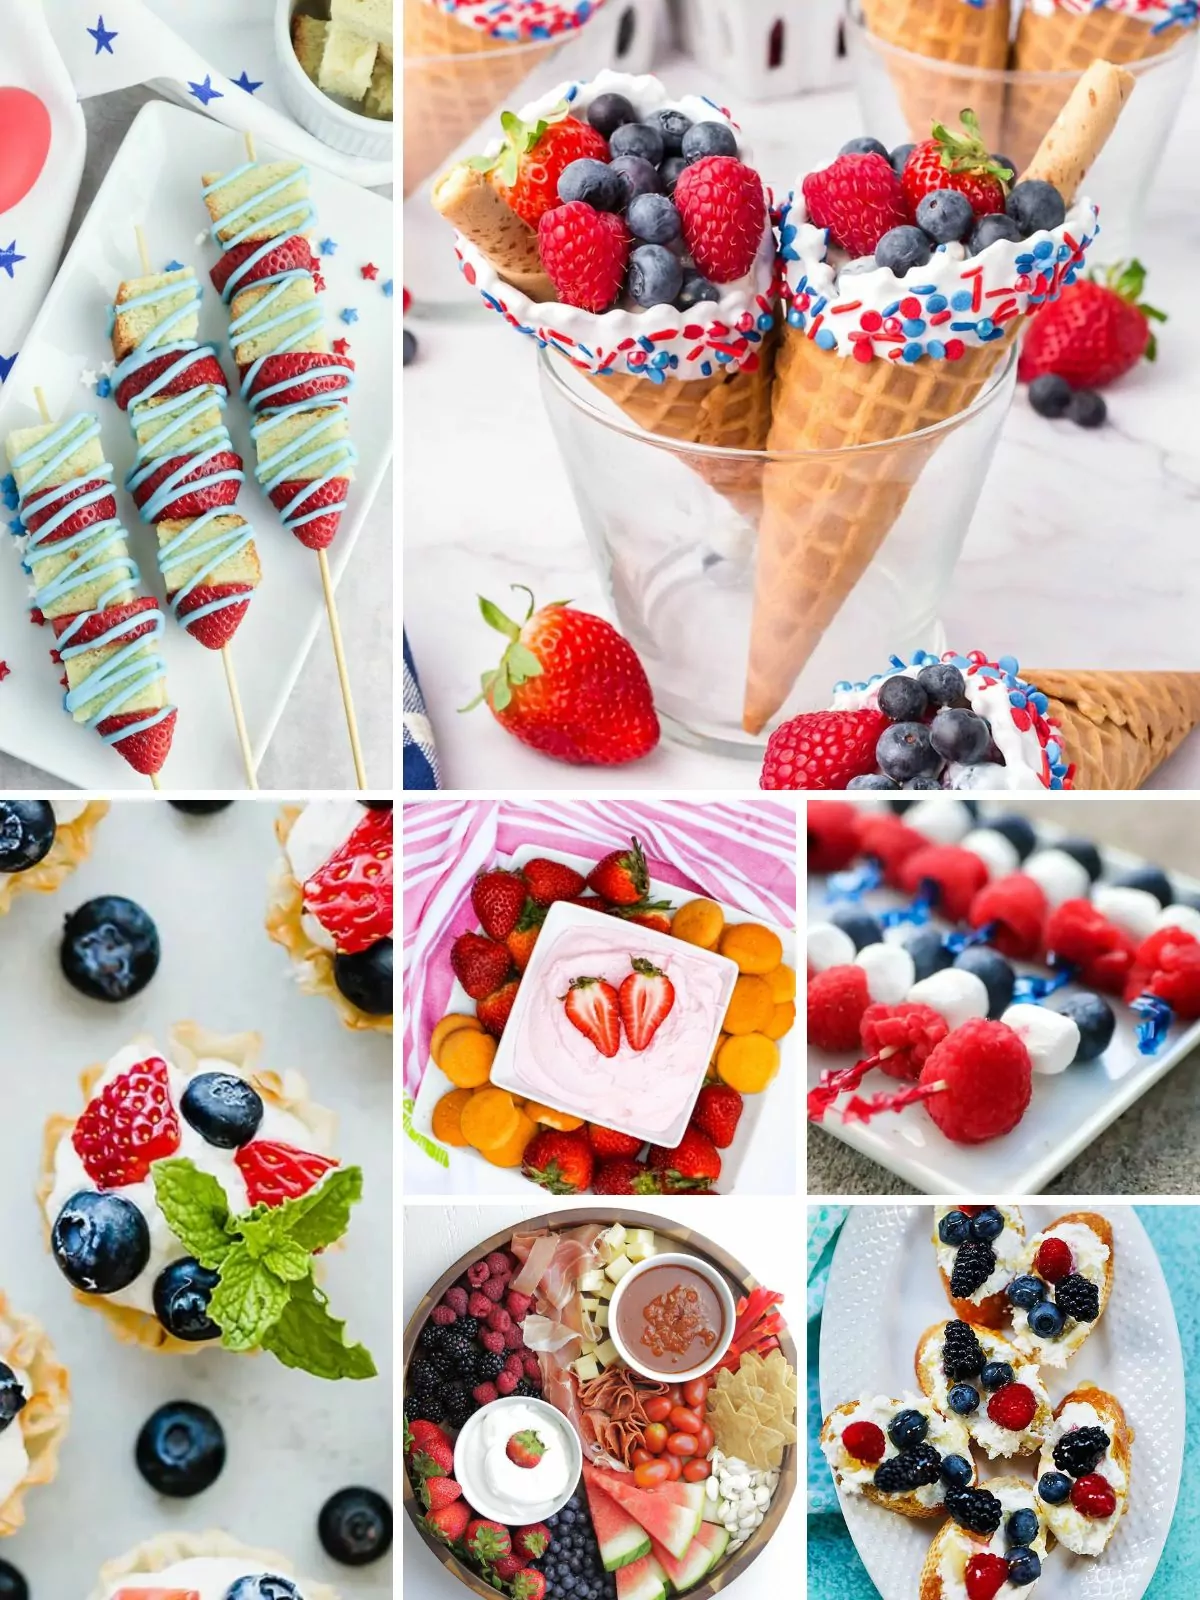 A collage of festive fruit appetizer recipes for the 4th of July, showcasing skewers with red, white, and blue fruits, star-shaped watermelon bites, and a flag-inspired blueberry arrangement.